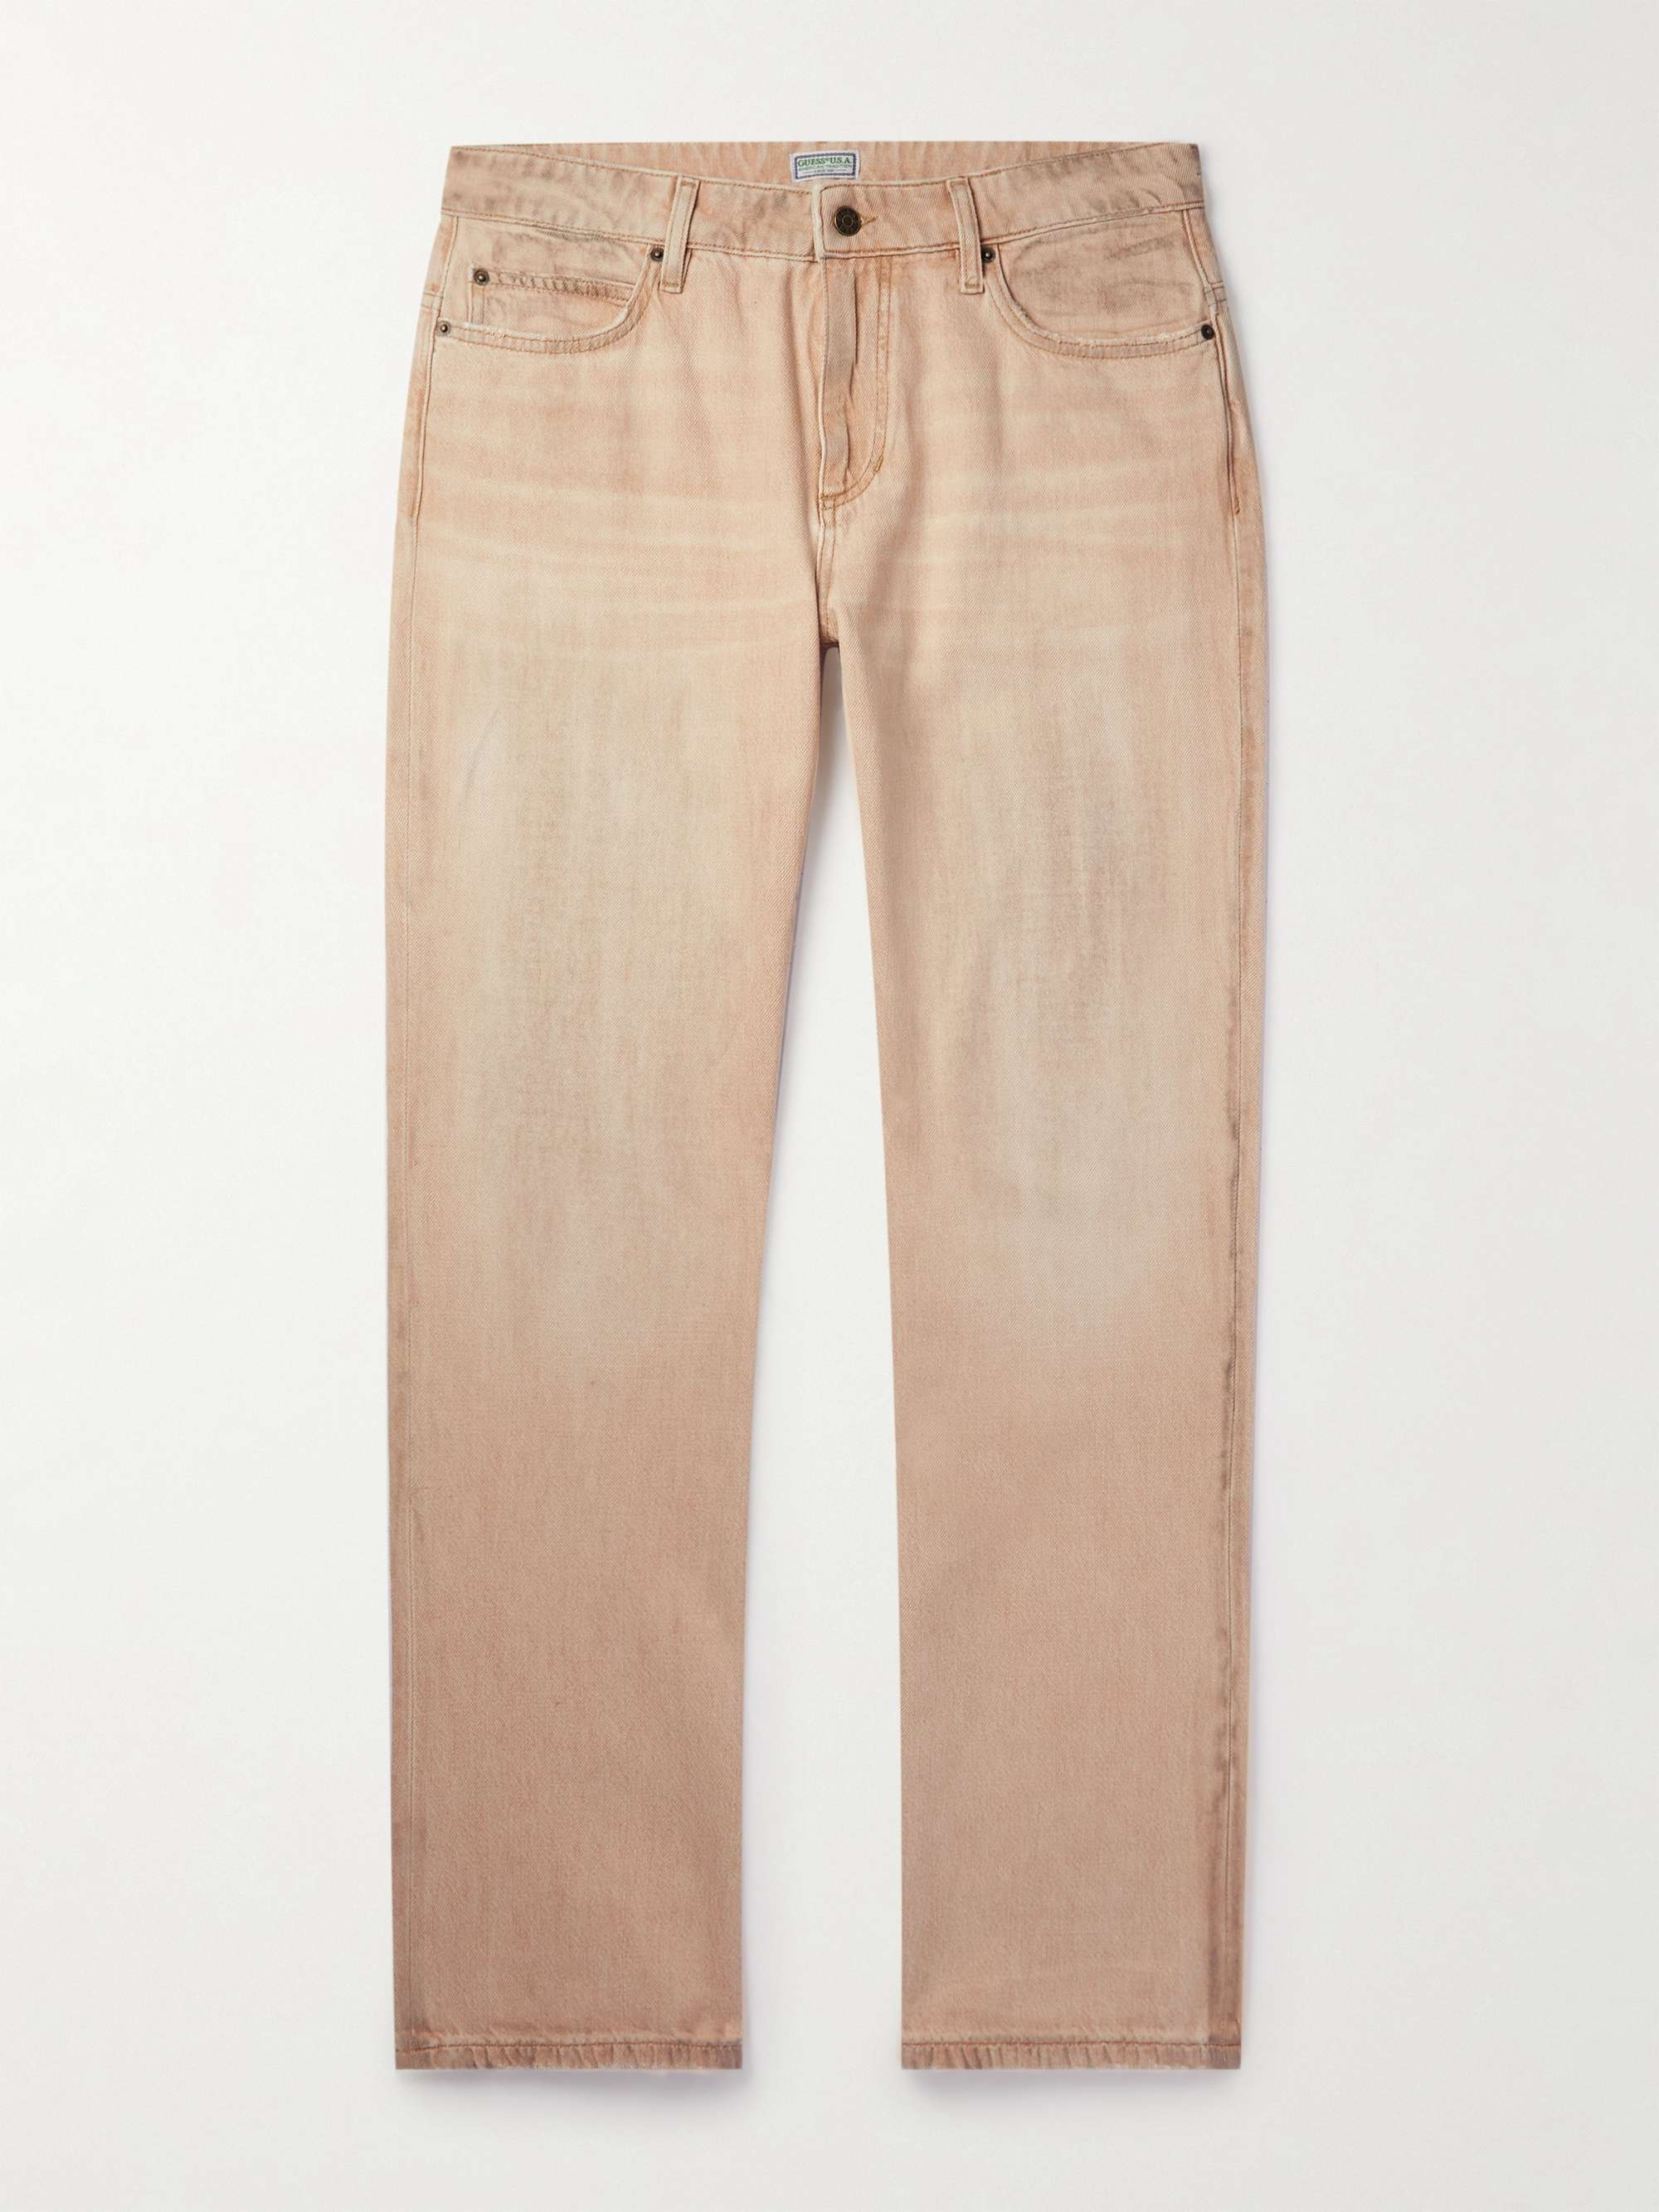 GUESS USA Tapered Distressed Jeans for Men | MR PORTER